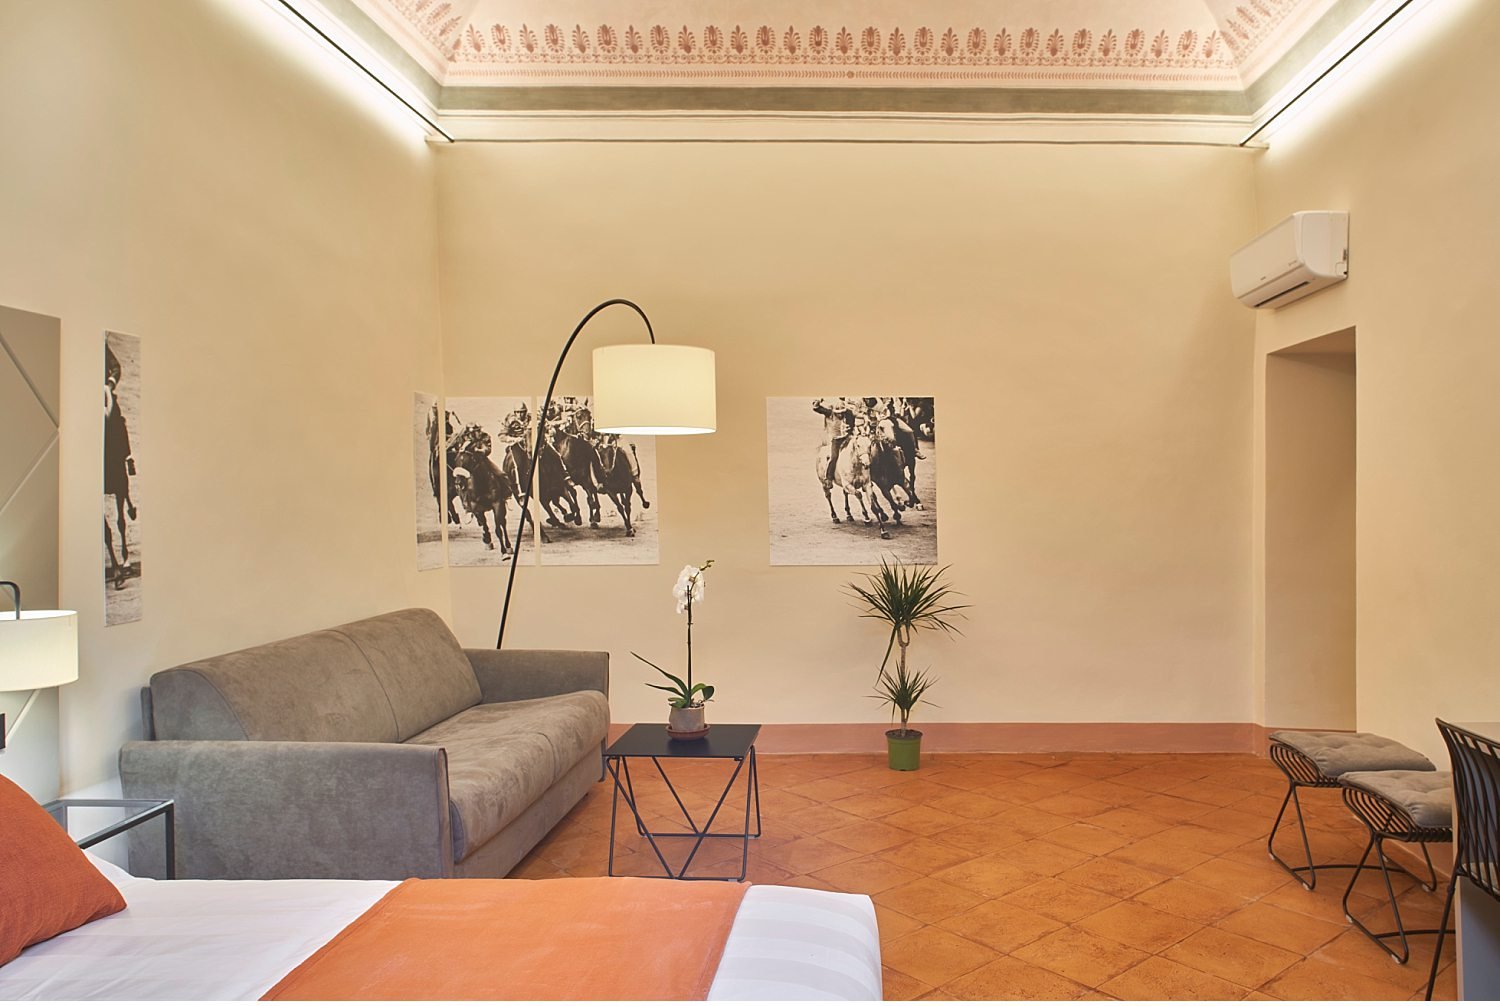  Prestigious apartments in the center of Siena, finely restored to welcome guests from all over the world and enjoy the city. La peoprietà real estate offers rooms with bathroom a stone's throw from Piazza del Campo and the Cathedral. The photo and v